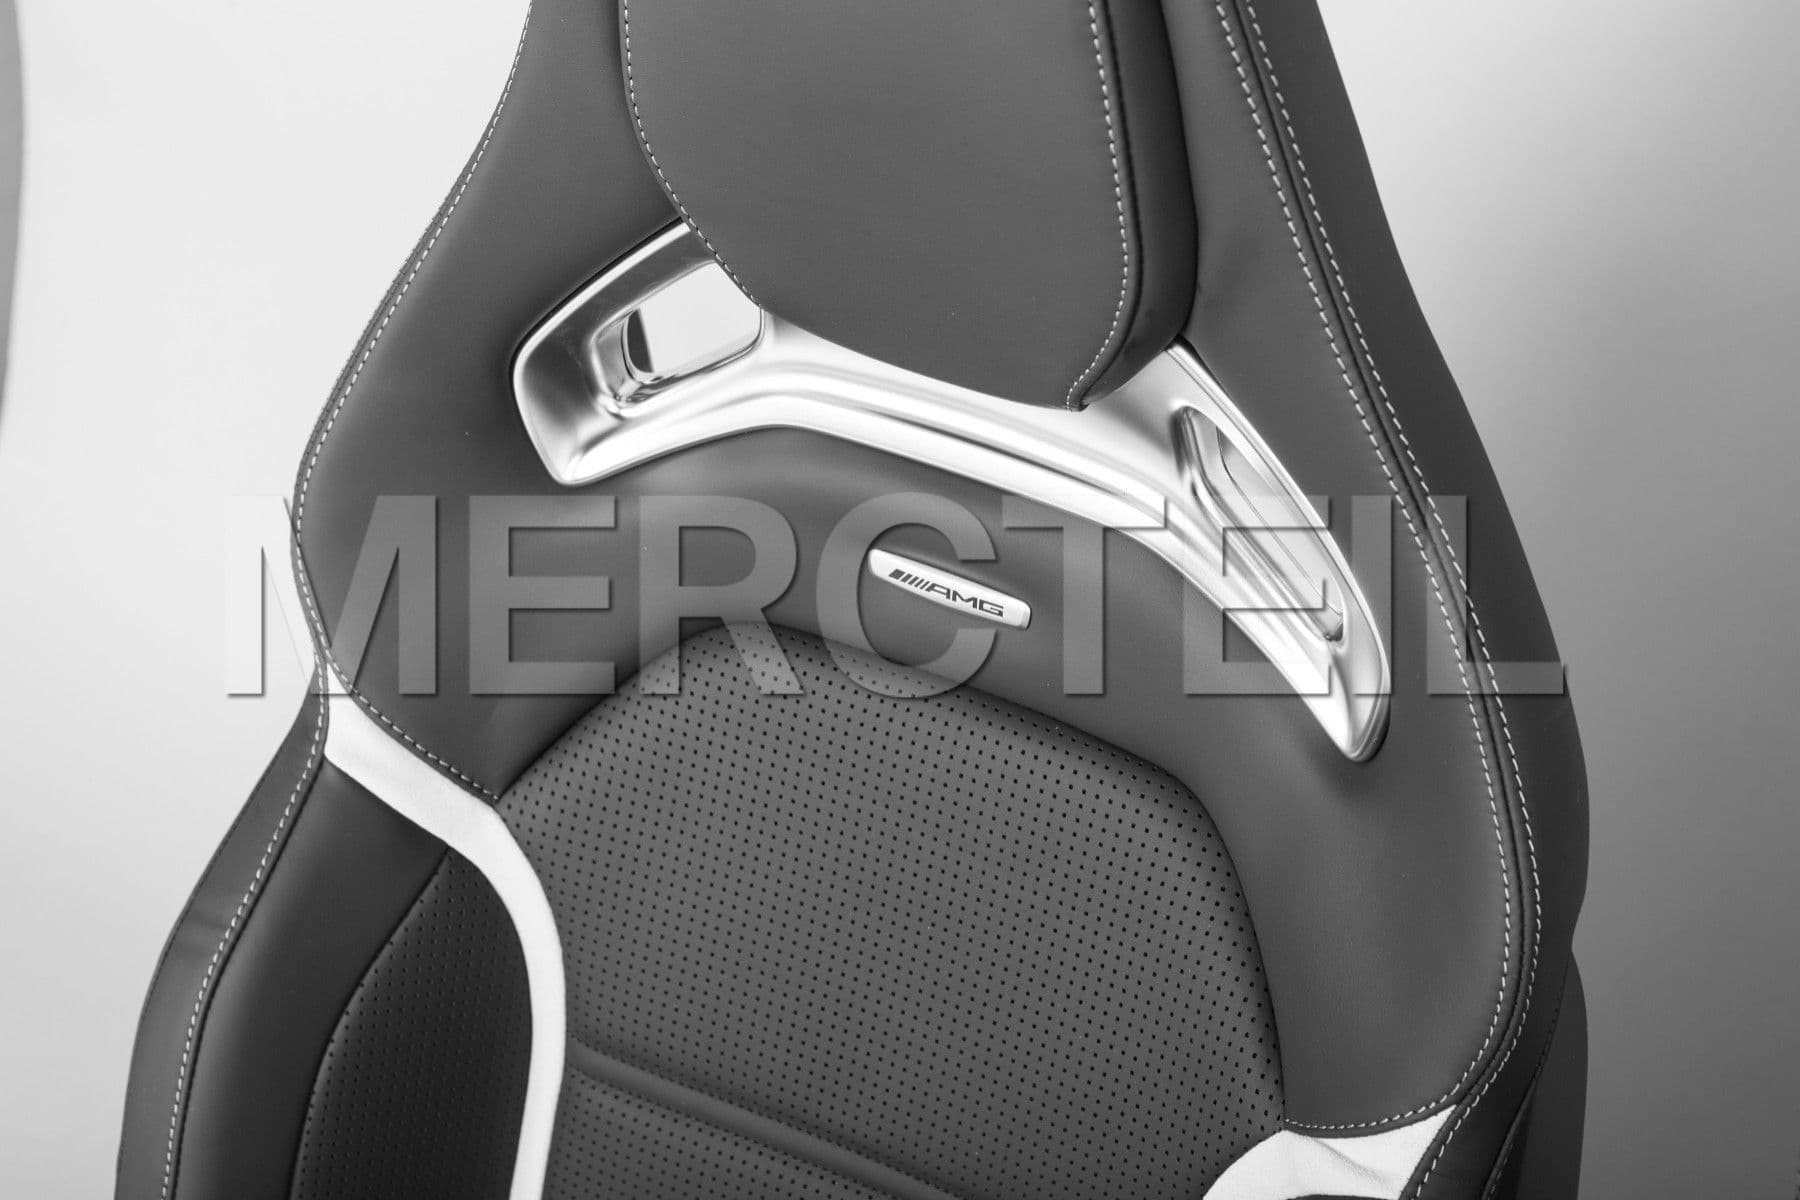 C63 AMG Coupe Performance Seats Genuine Mercedes-AMG